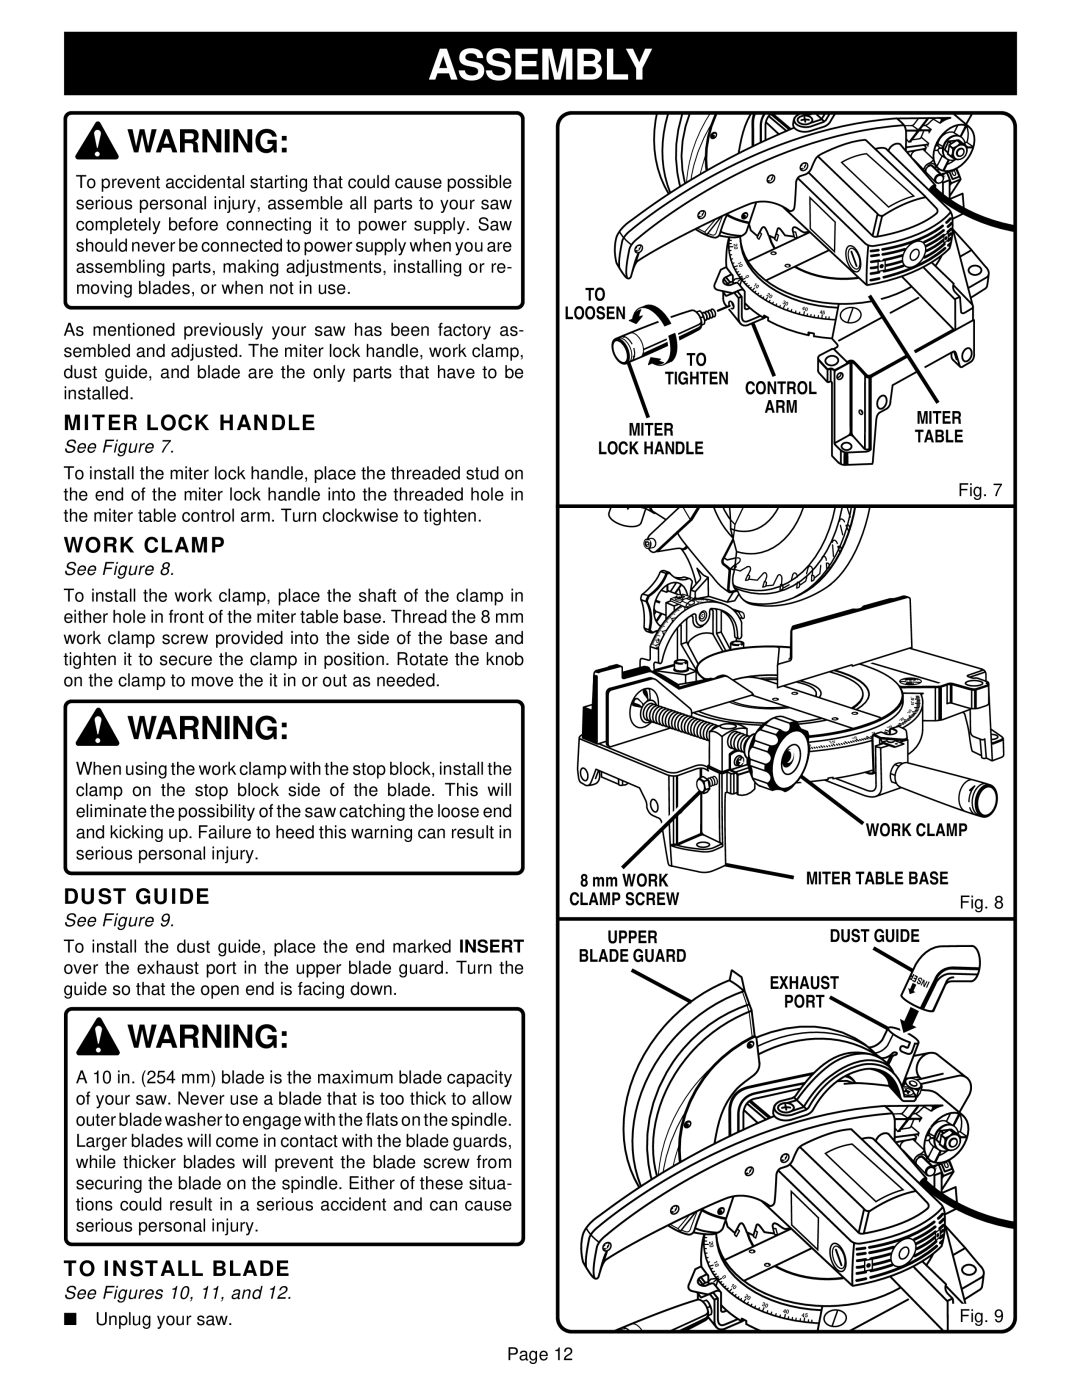 Ryobi TS230 warranty Assembly, Dust Guide, To Install Blade, Upper, See Figures 10, 11 